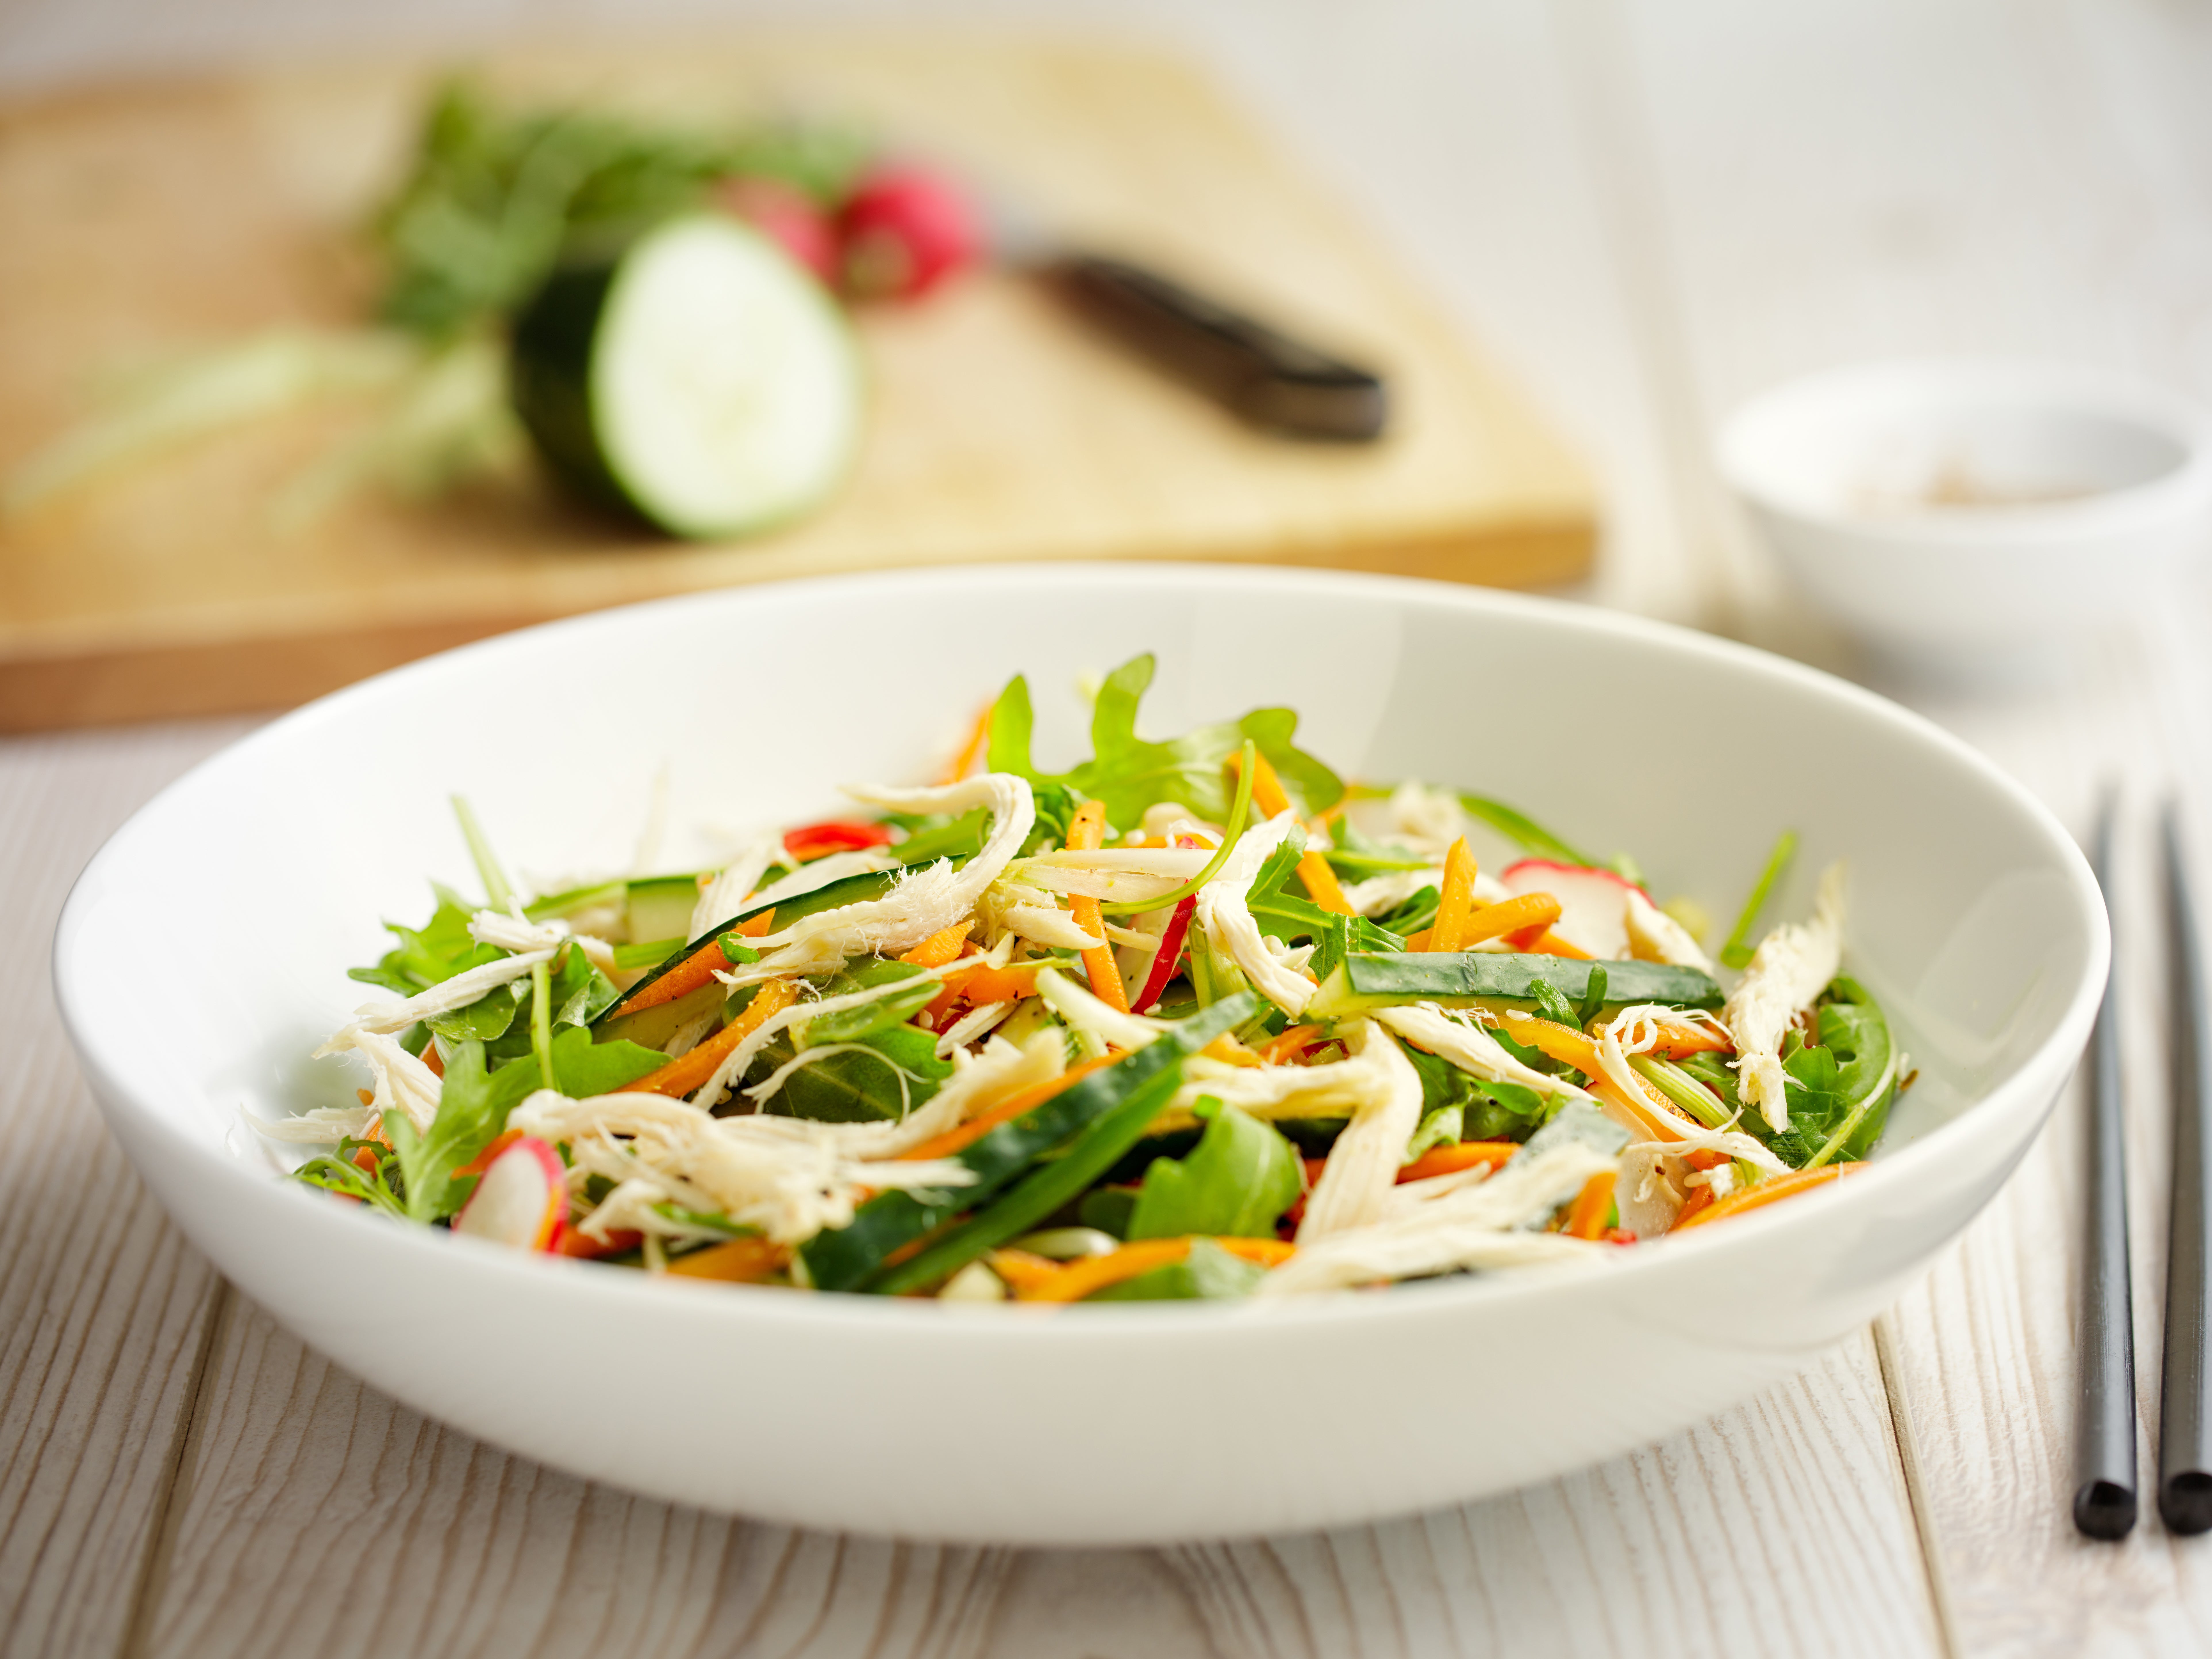 Nuoc cham gives this simple, satisfying salad a salty-sweet finish